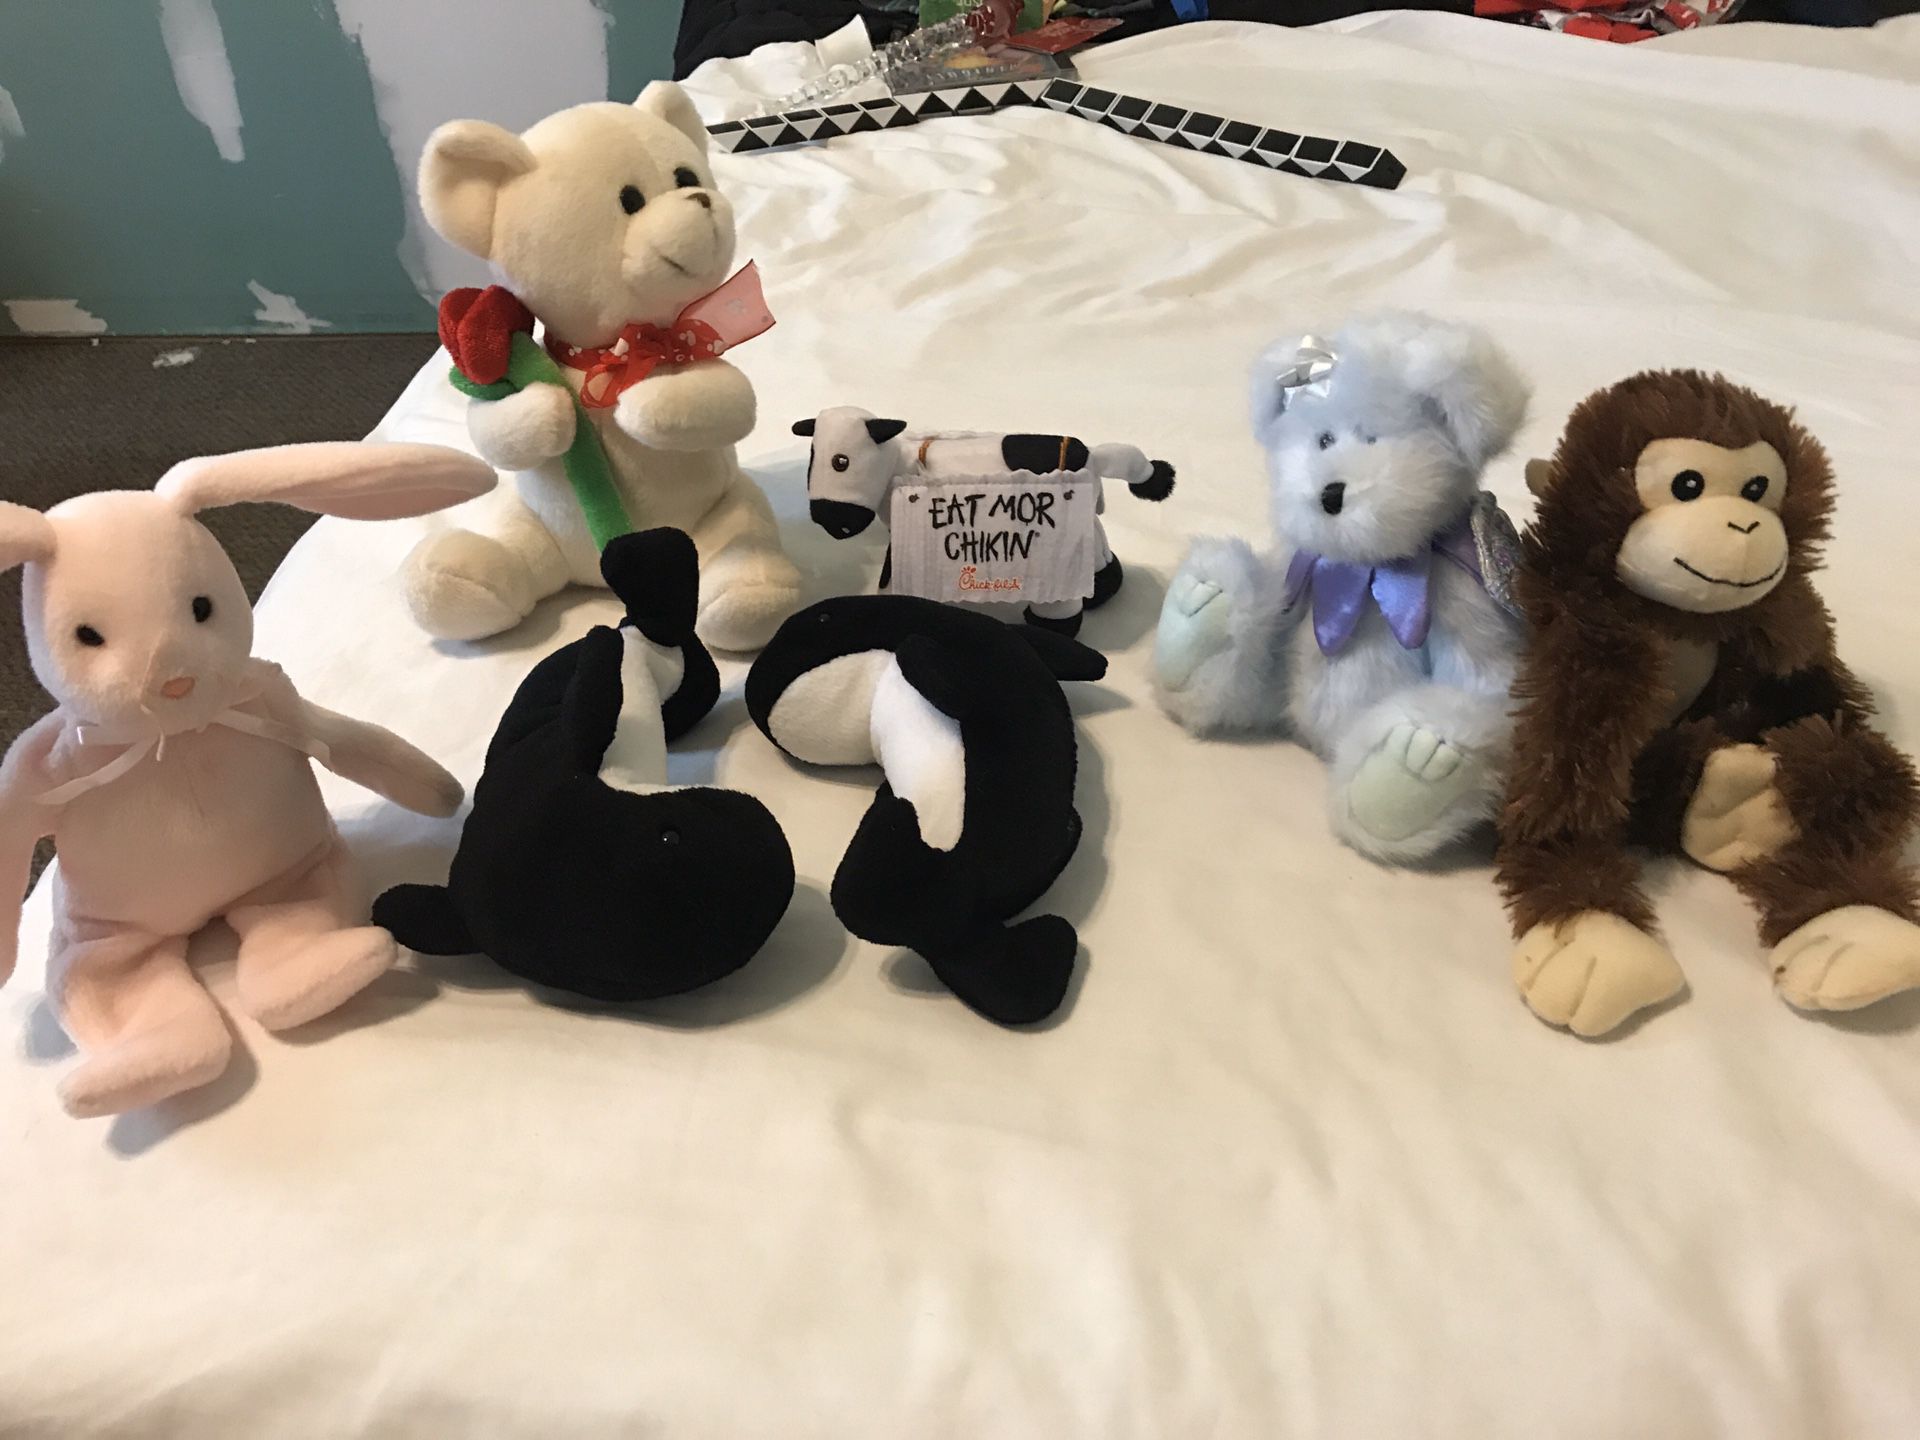 Assorted stuffed animals moveable blue angel bear monkey chick fil a cow rabbit whales 7 total